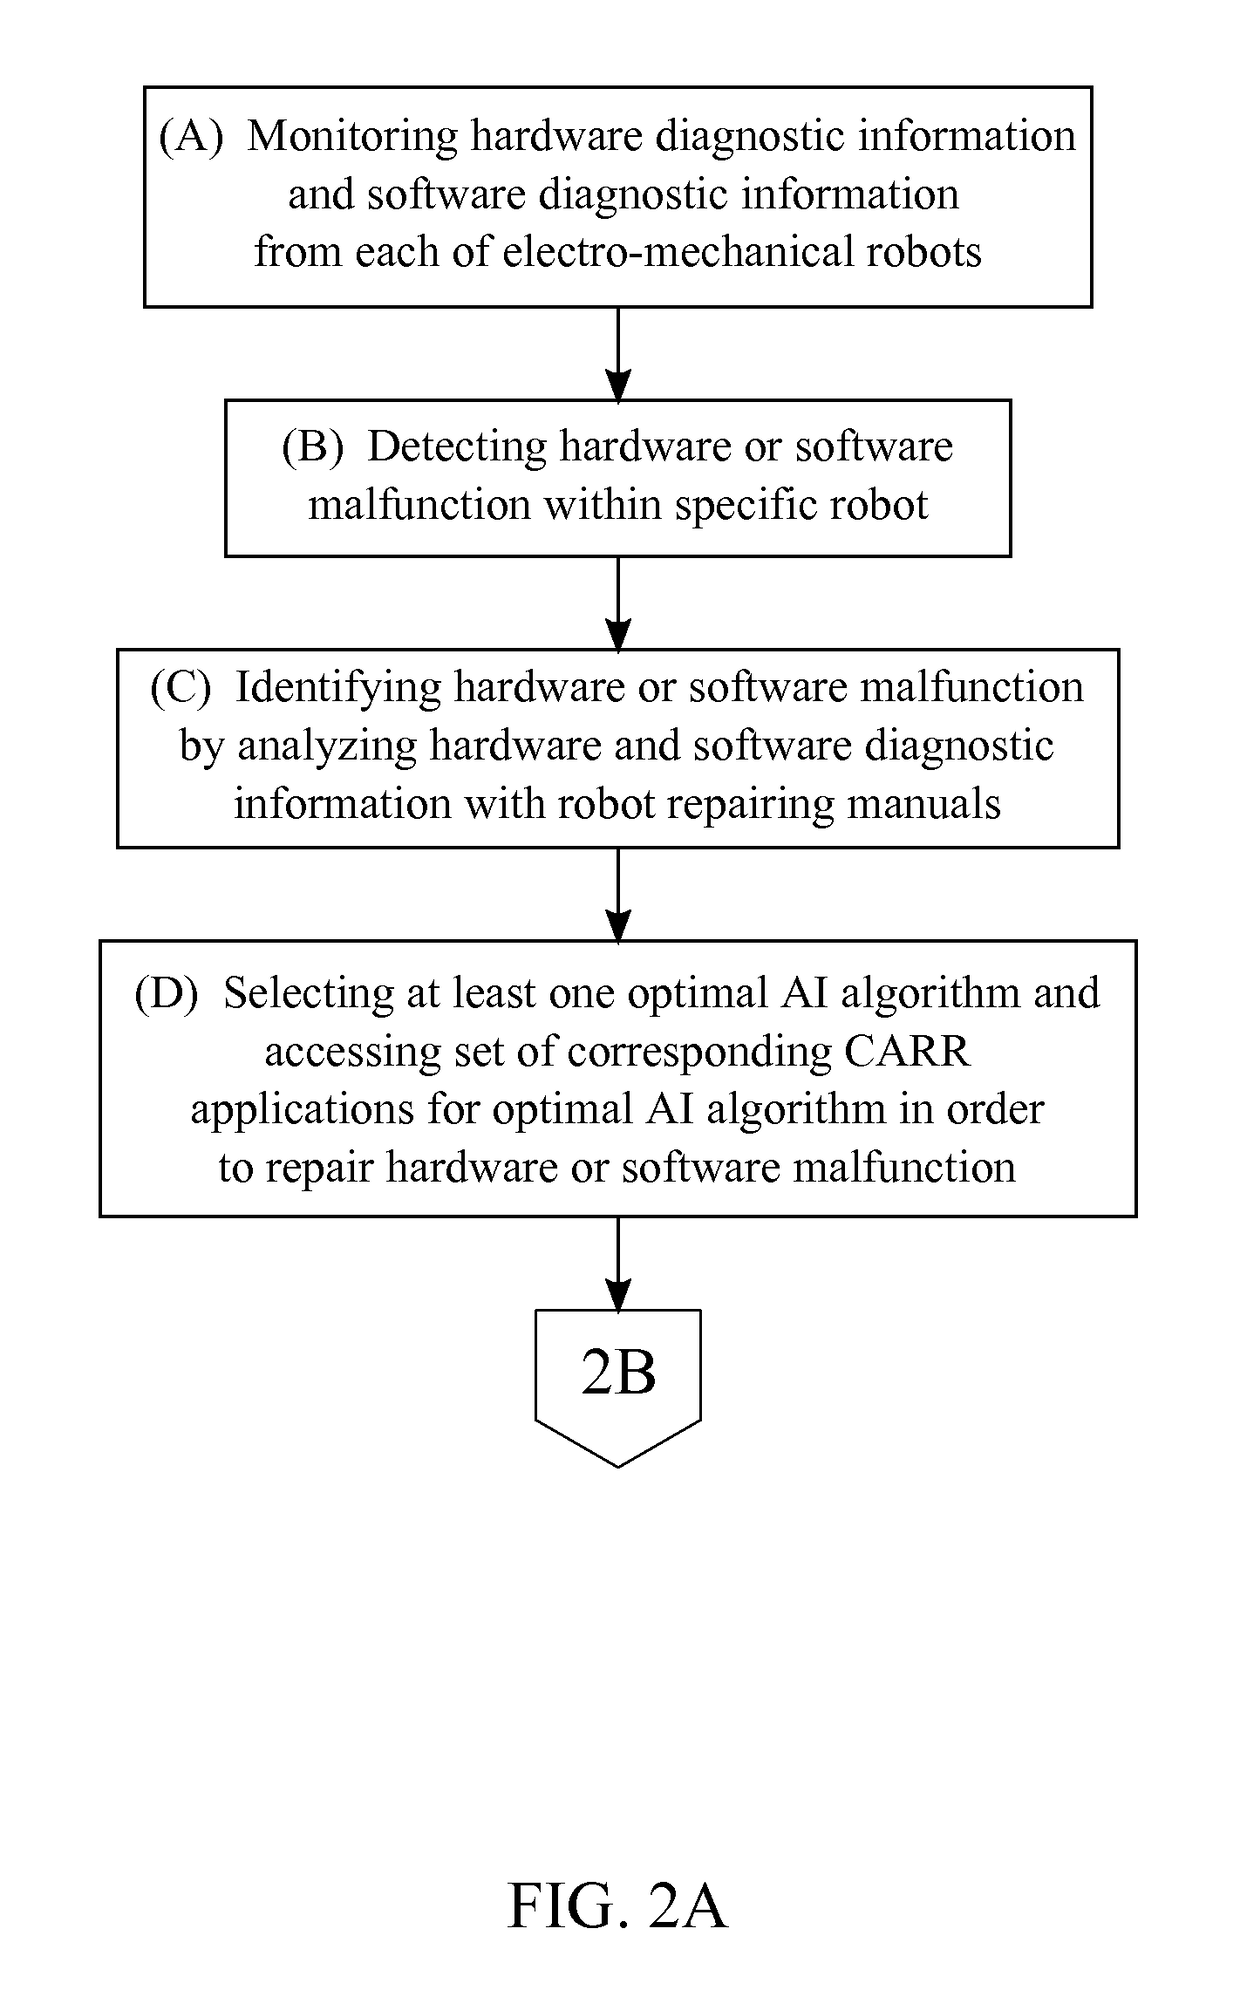 Software application for managing a collection of robot repairing resources for a technician